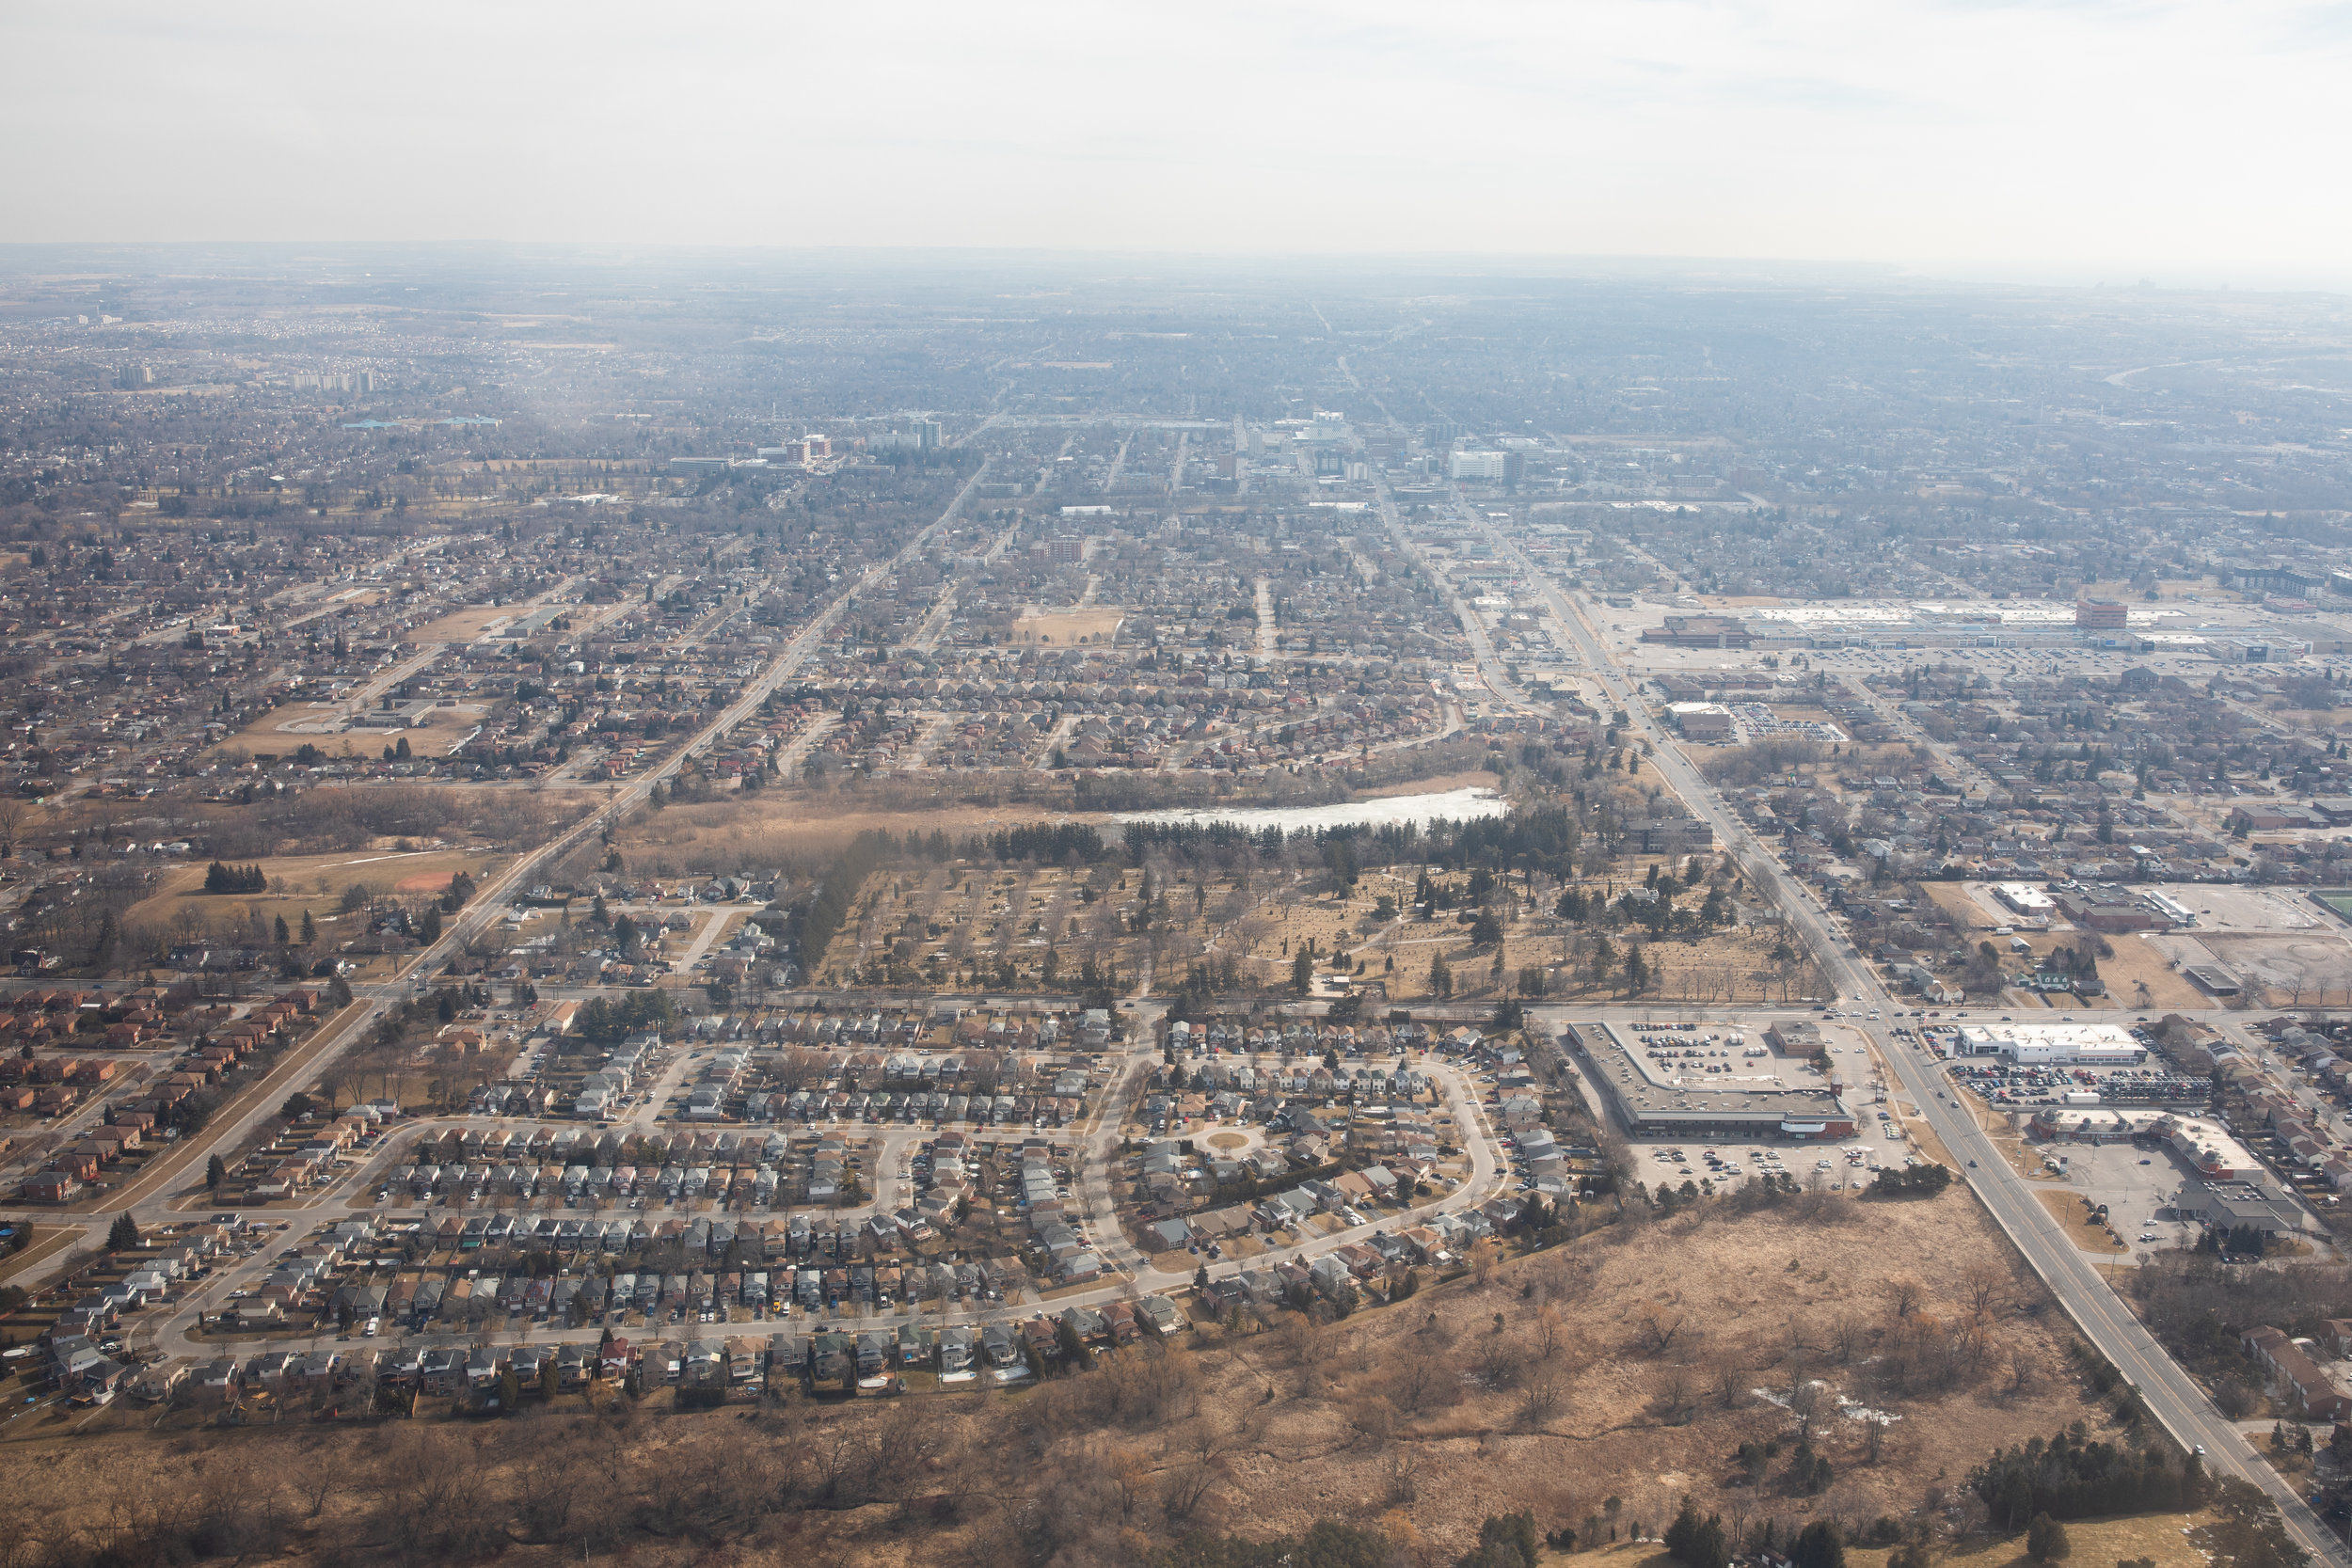  March 24th 2019.  Entering Oshawa from the west side,  I flew in a small plane from the Oshawa Airport over the town.  This is on the edge of Whitby, with Thorton Rd and Dundas/King in site.  